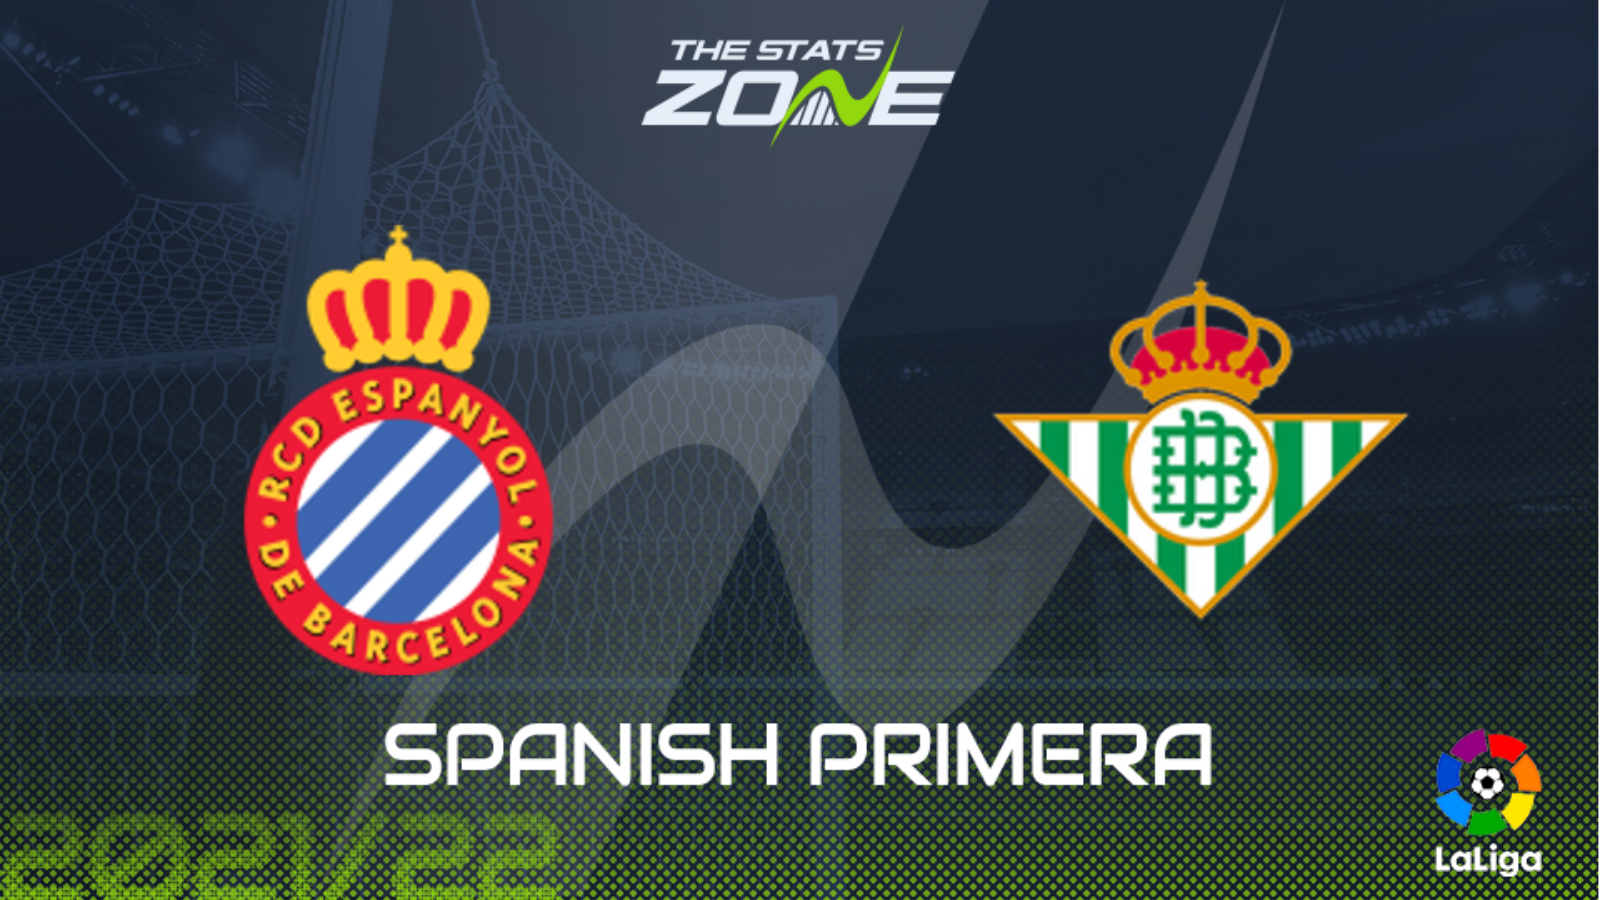 Espanyol vs Real Betis Preview - The Zone